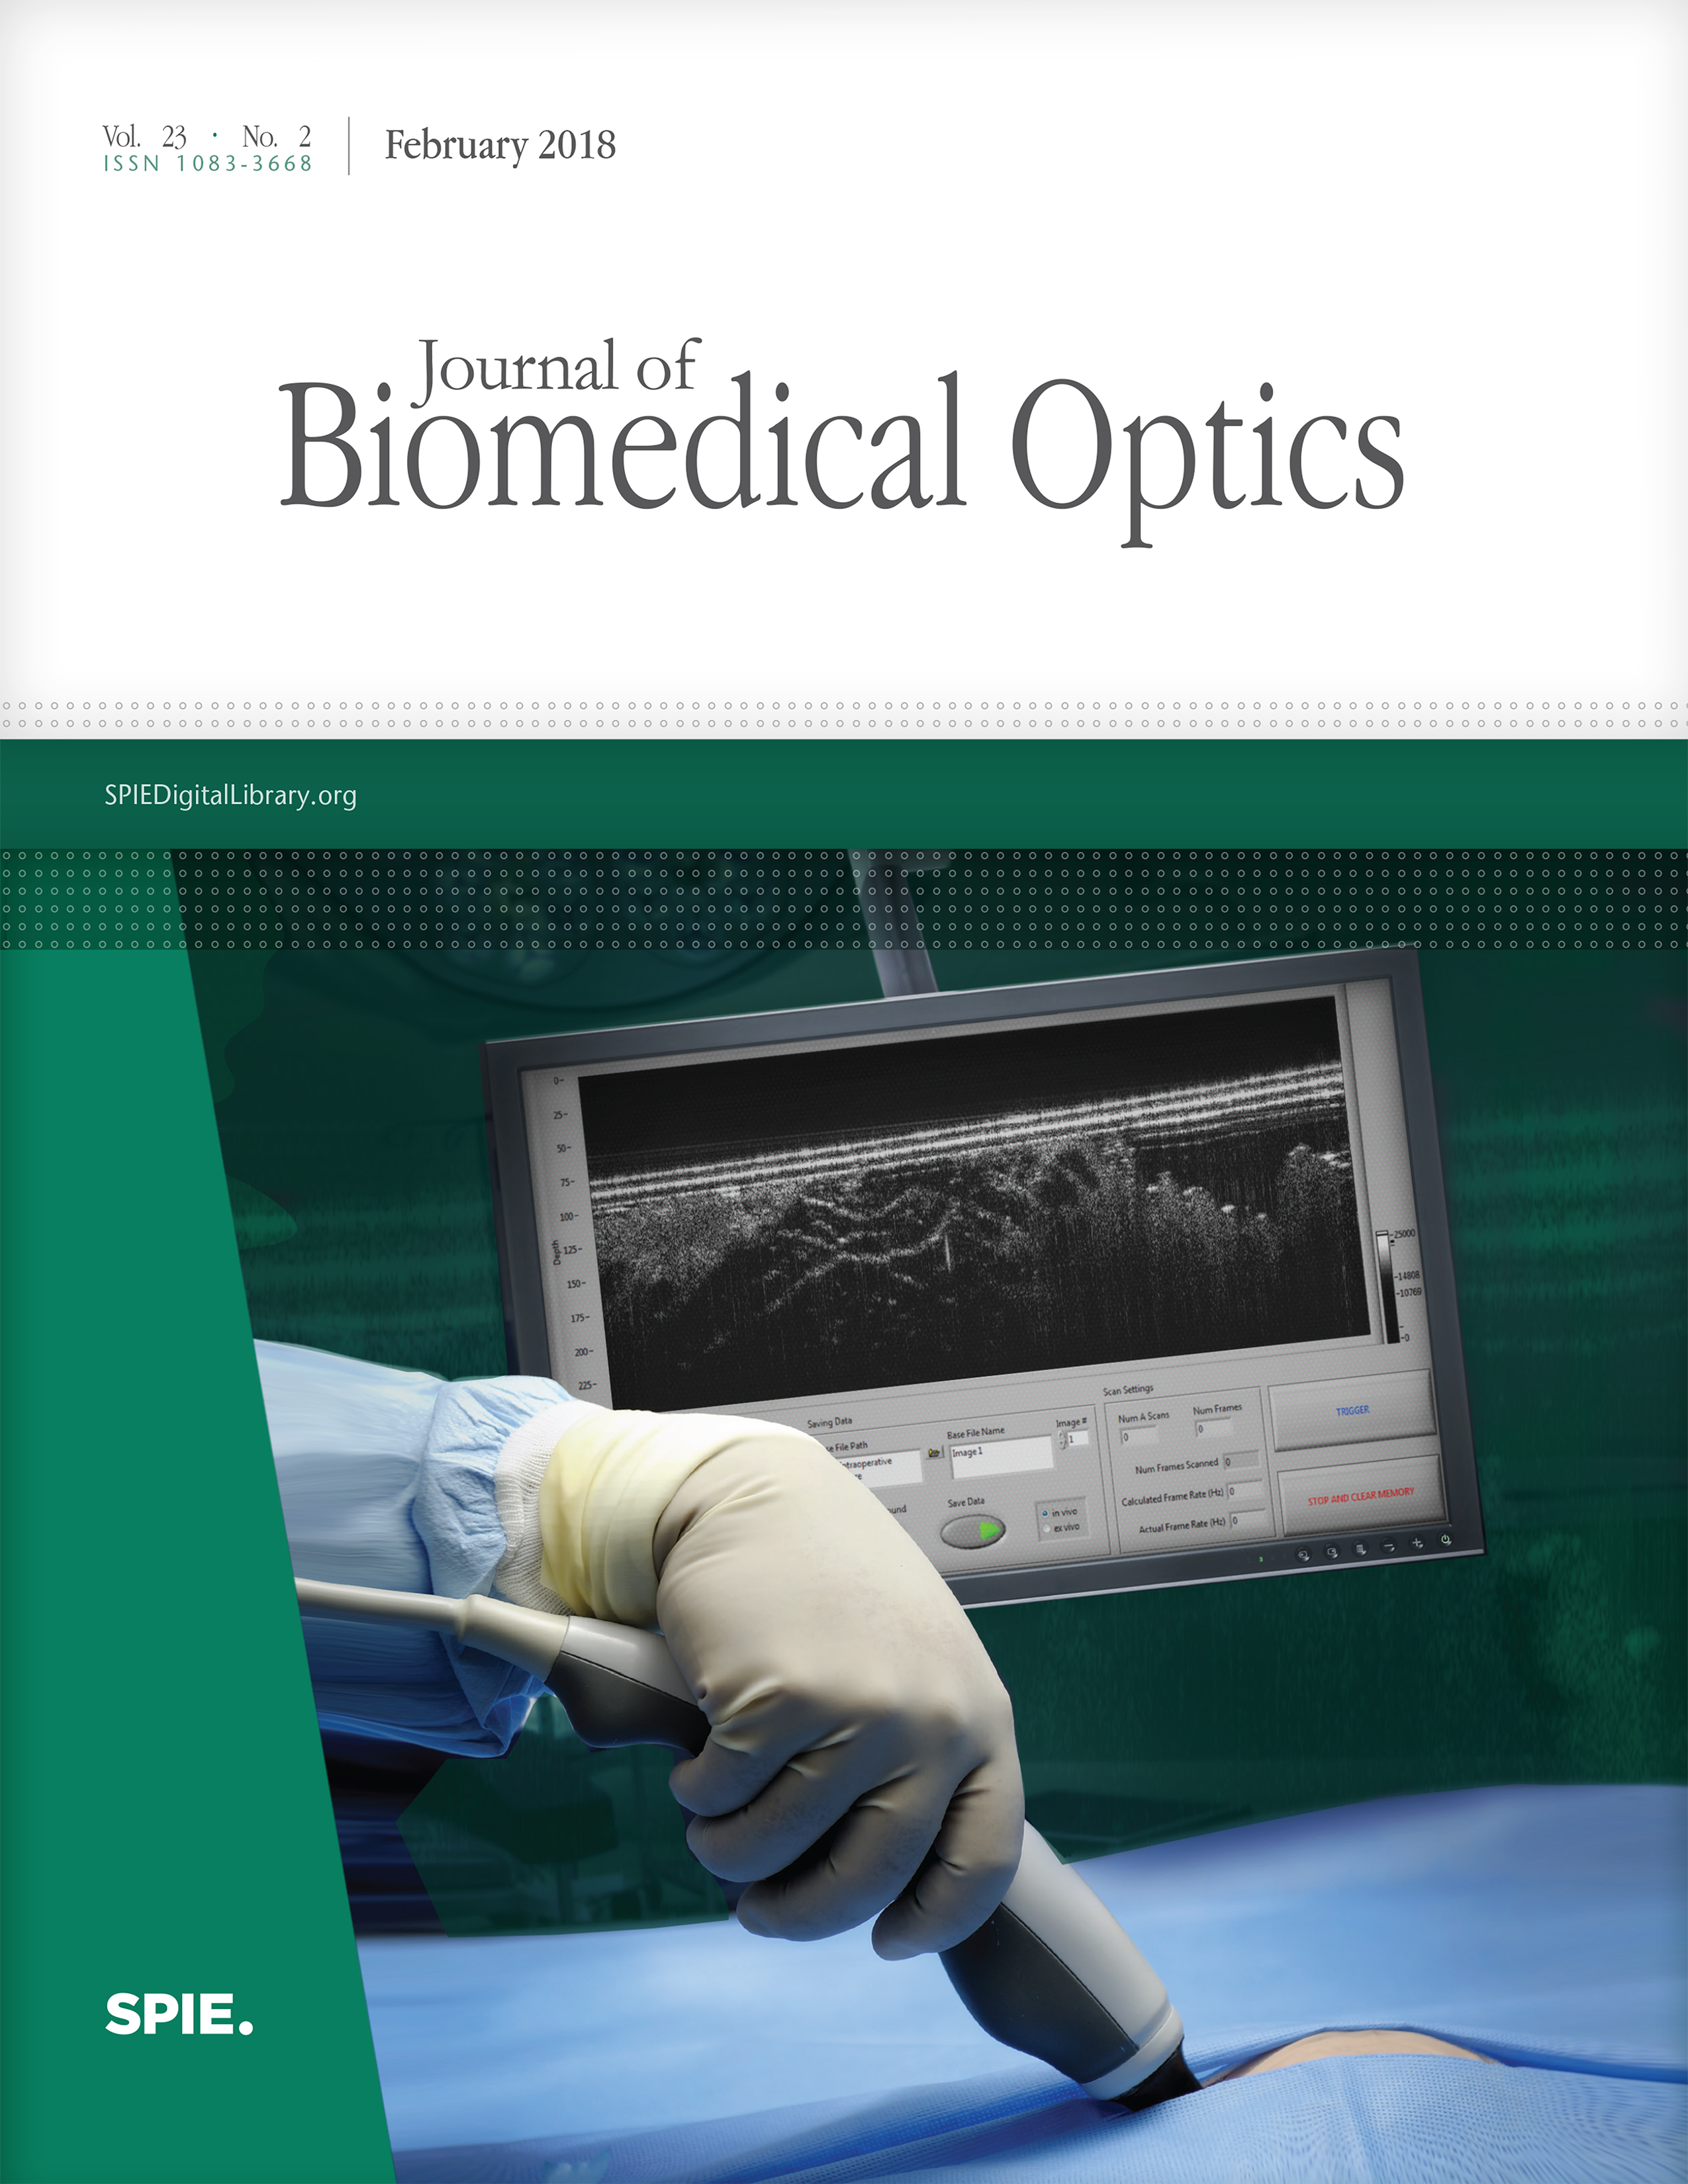 Label-free optical imaging technologies for rapid translation and use during intraoperative surgical and tumor margin assessment.